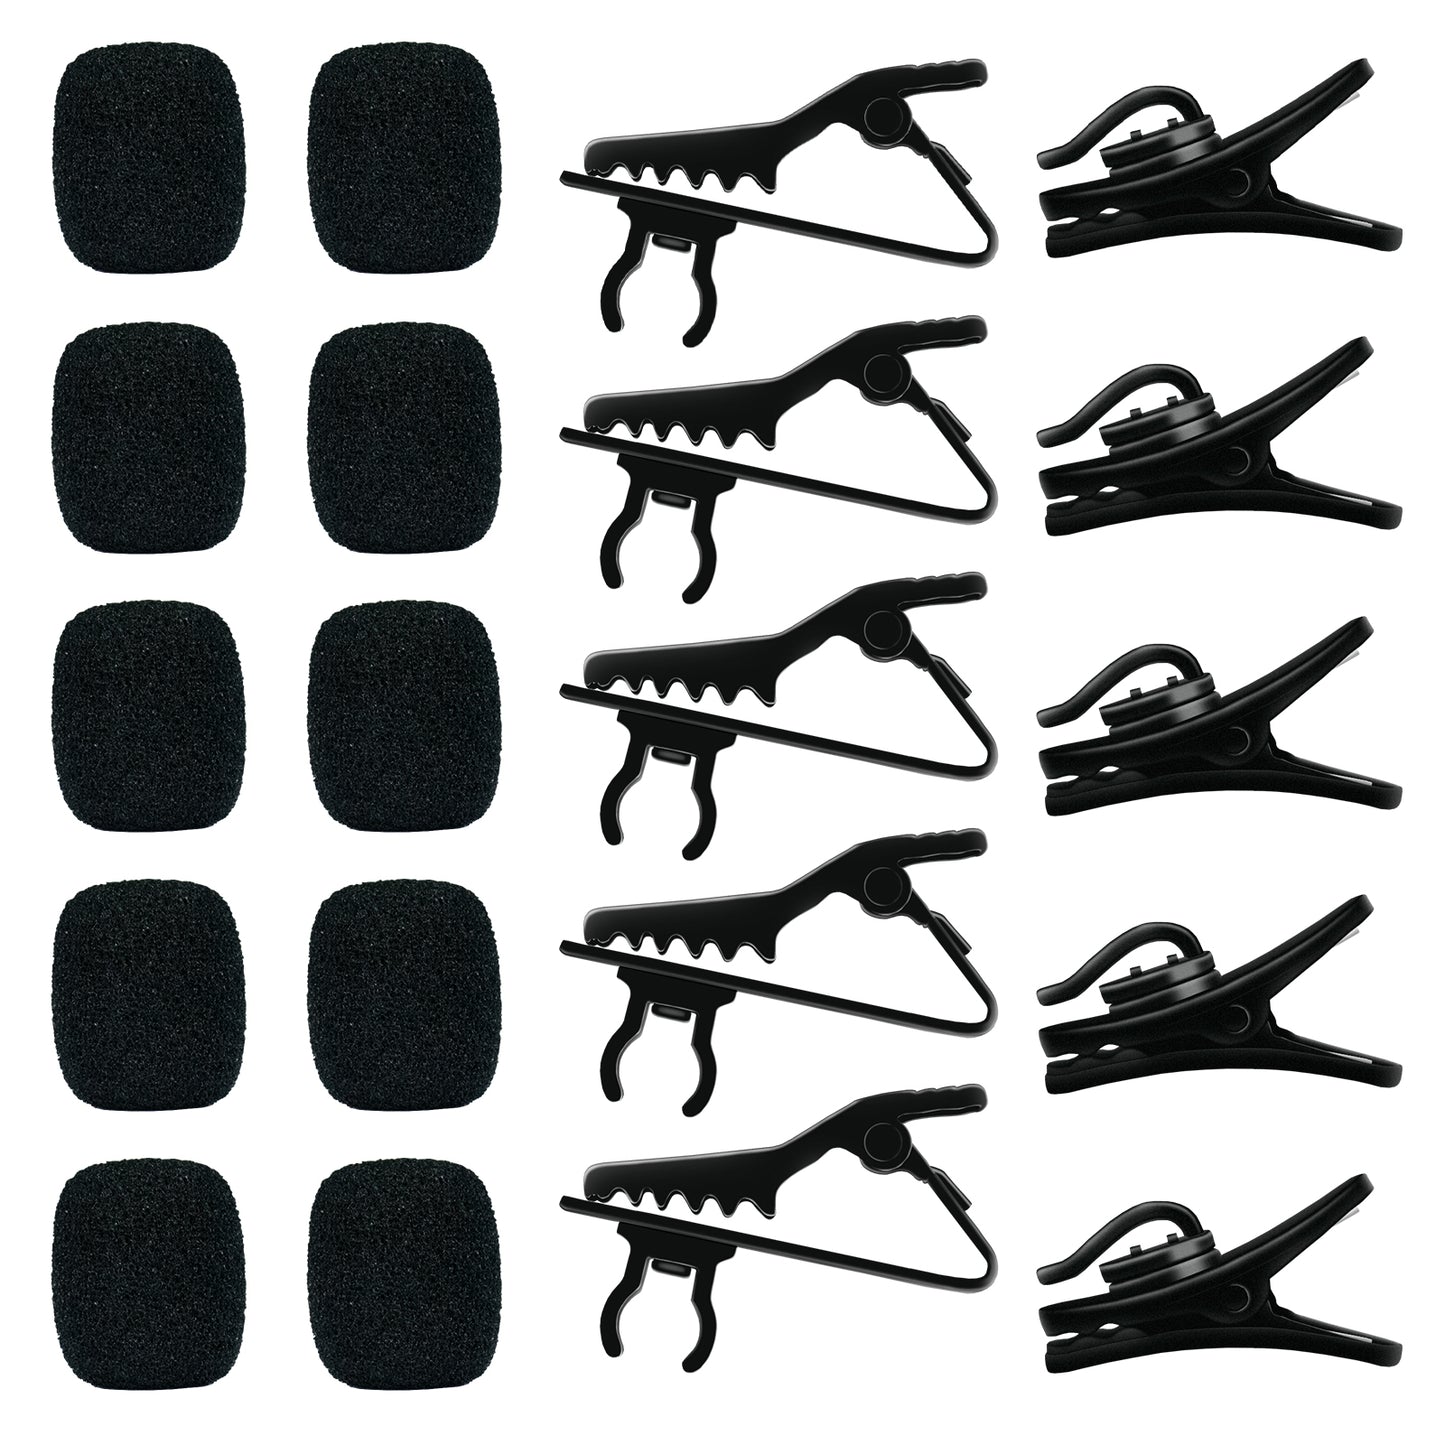 Clip & Foam Cover Set for Lapel MIC-5 Pack of each